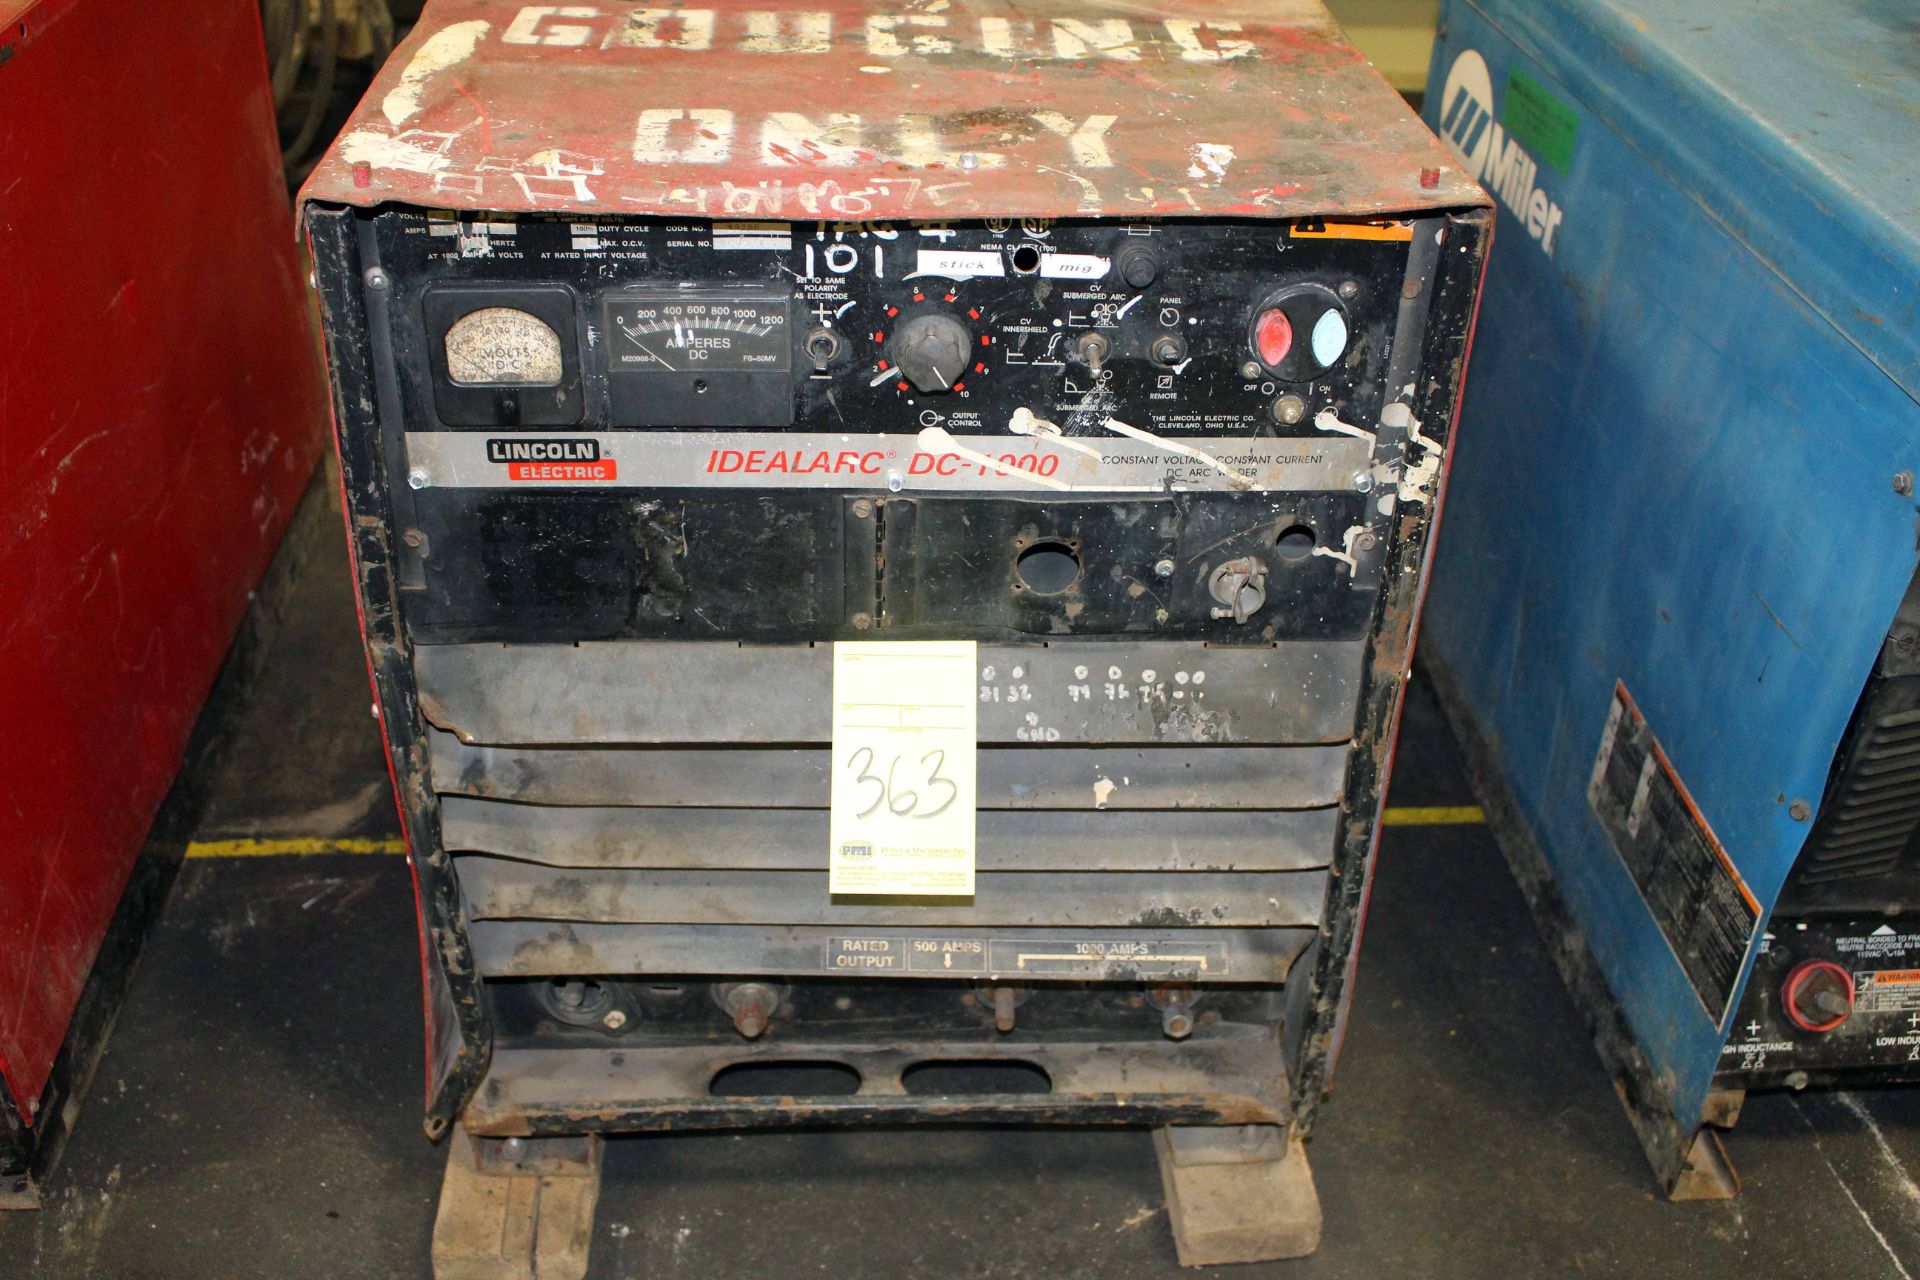 WELDING MACHINE, LINCOLN MDL. IDEAL ARC DC-1000, 1000 amps., 40 v. @100% duty cycle, S/N